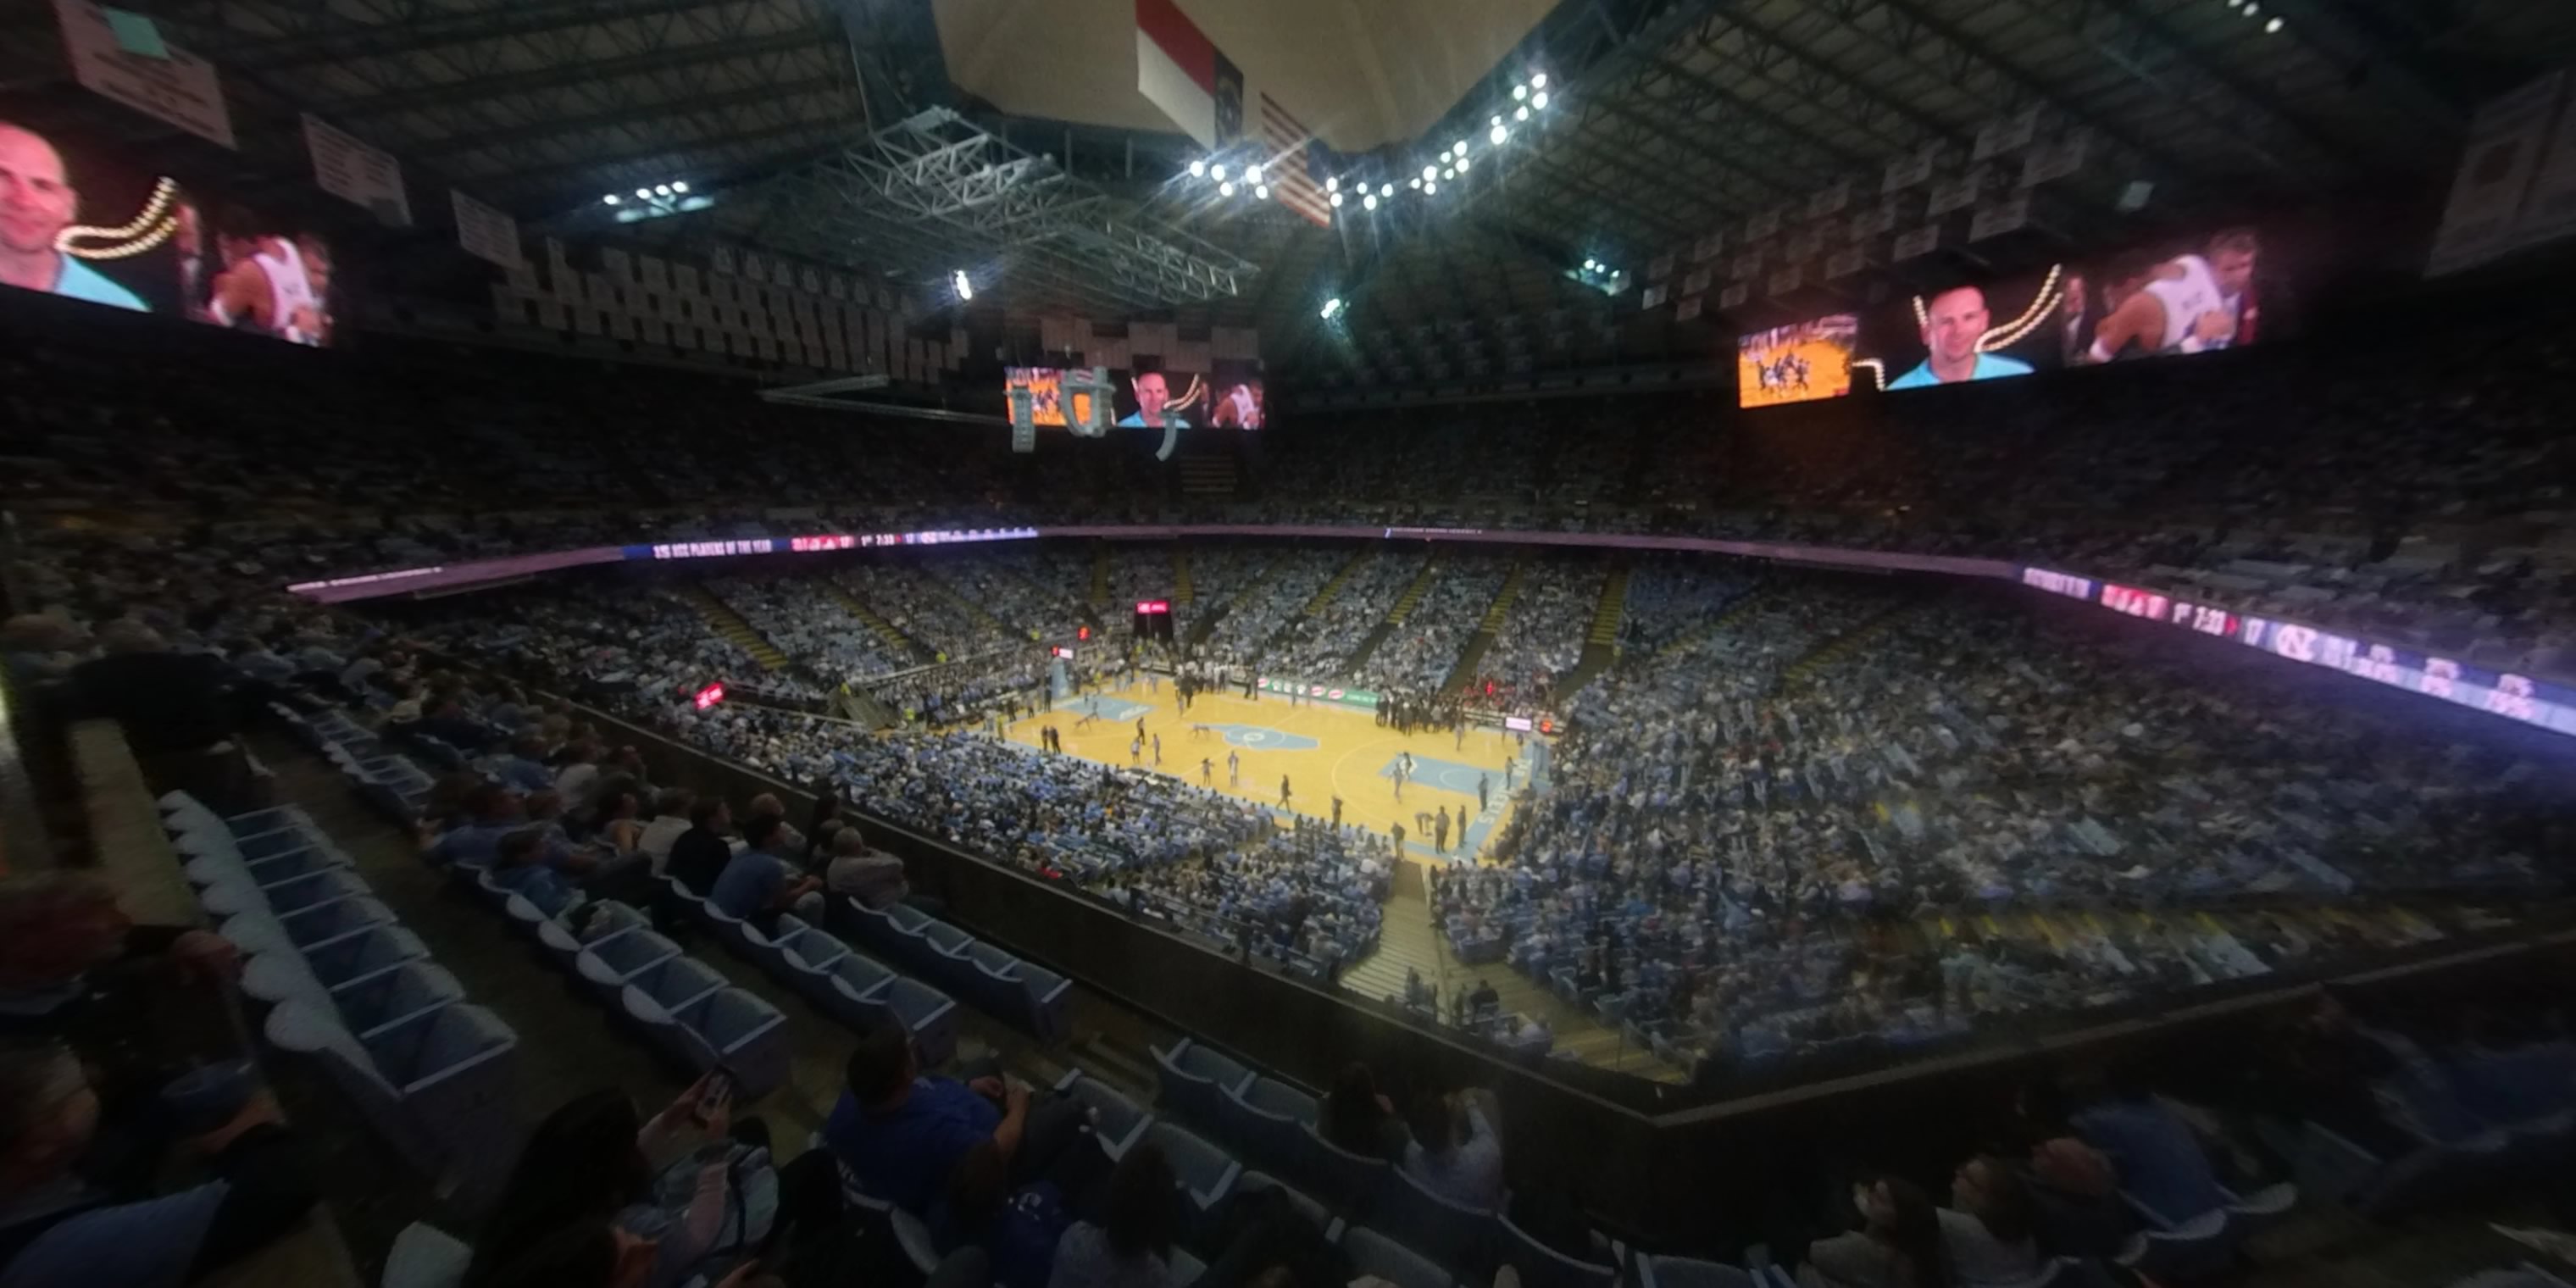 section 227 panoramic seat view  - dean smith center